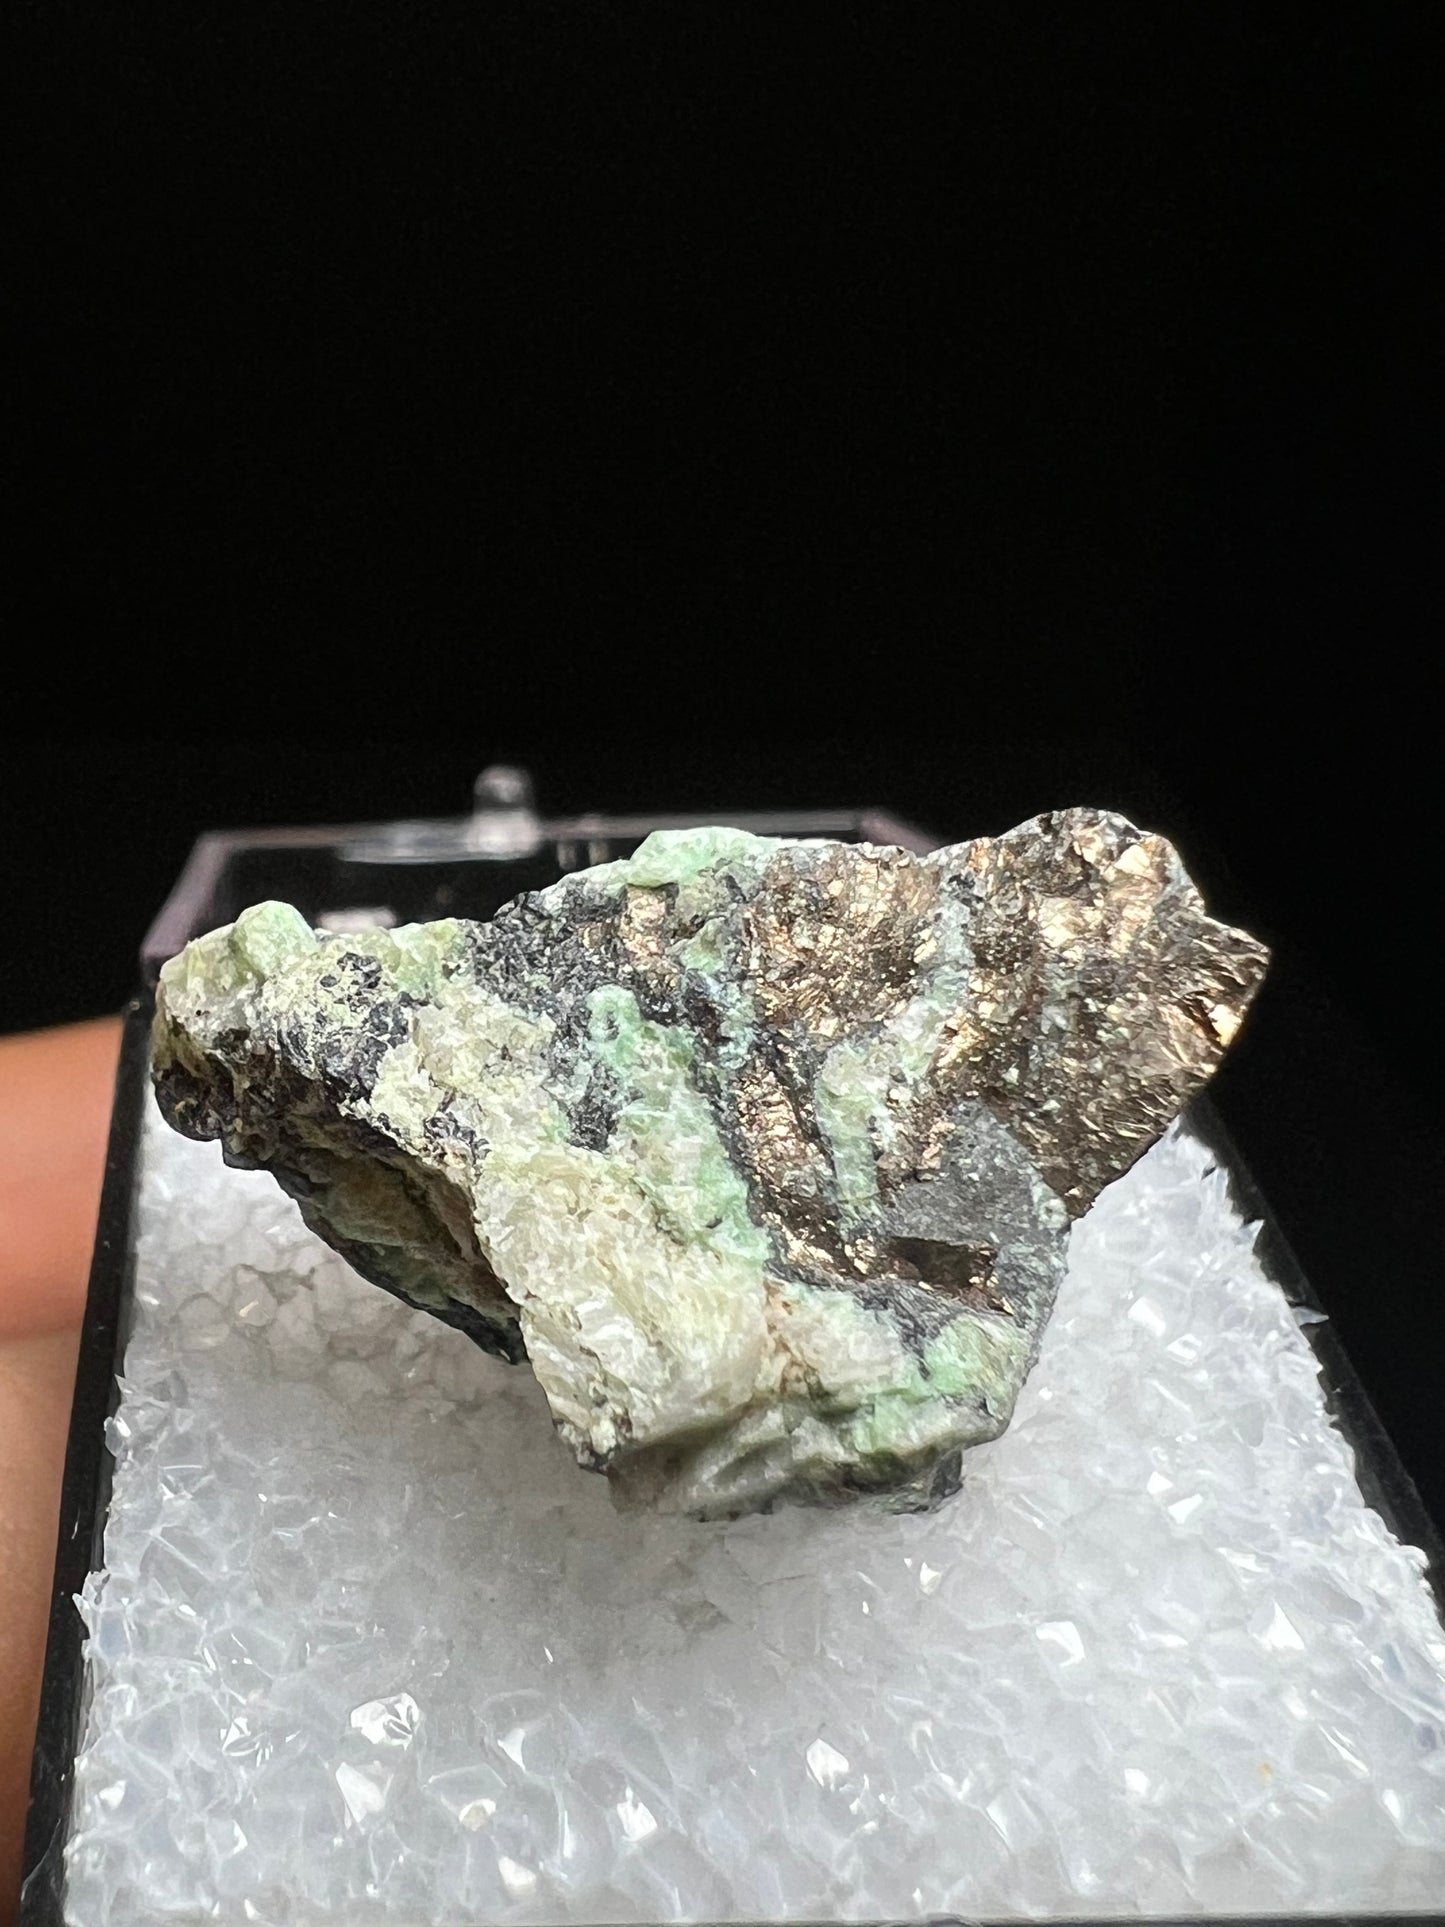 Nickeline With Annabergite From Tamdrost Mine, Zagora, Morocco- Collectors Piece, Crystal Healing, Specimen, Mineral (Box Included)